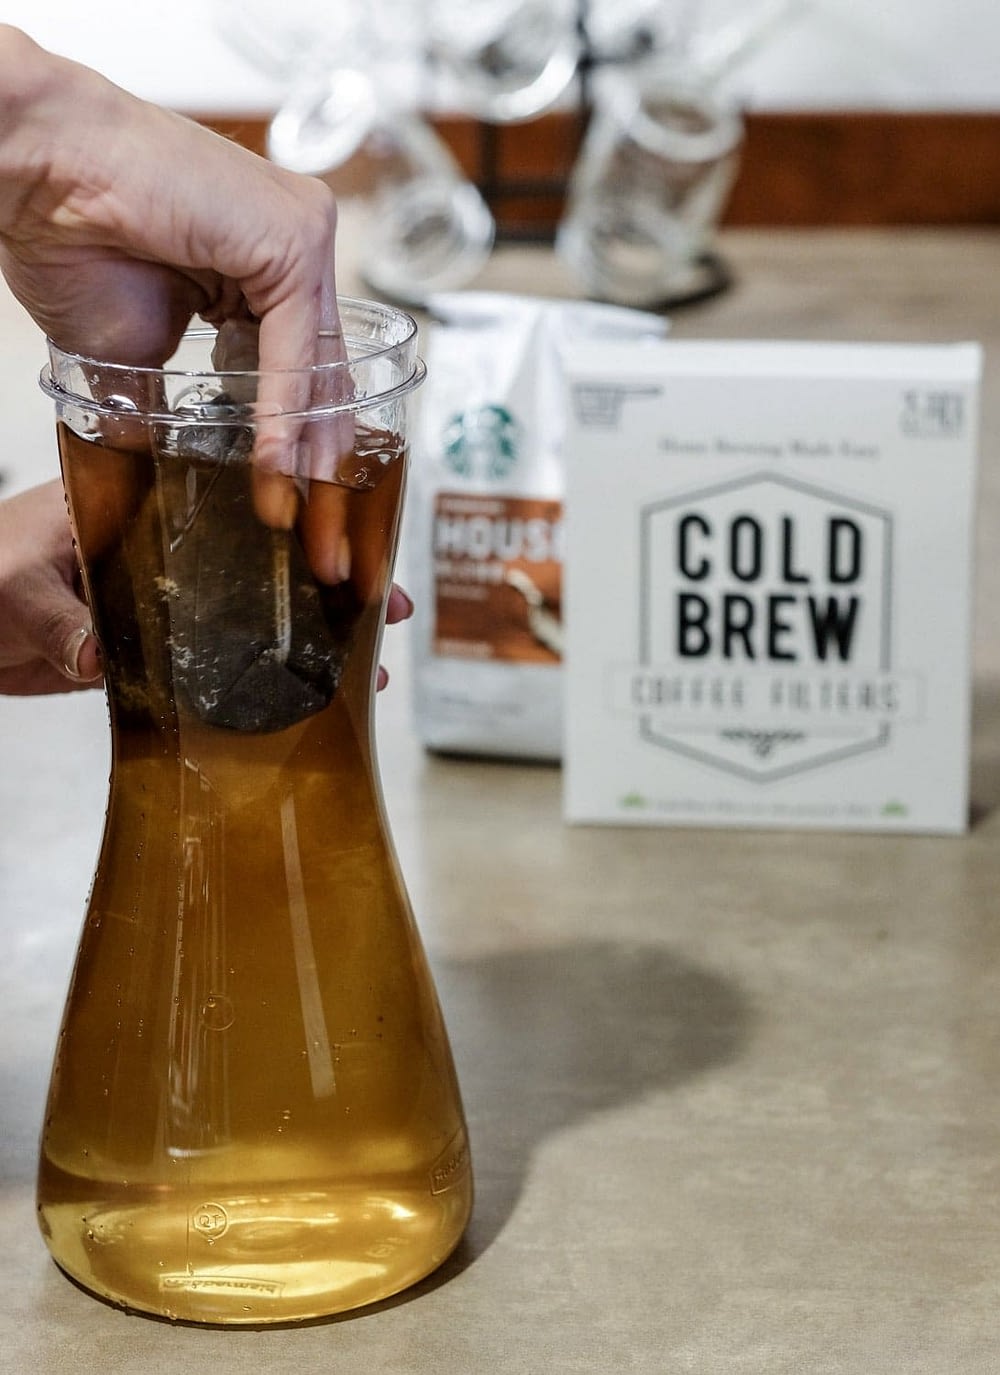 putting cold brew coffee grinds into water